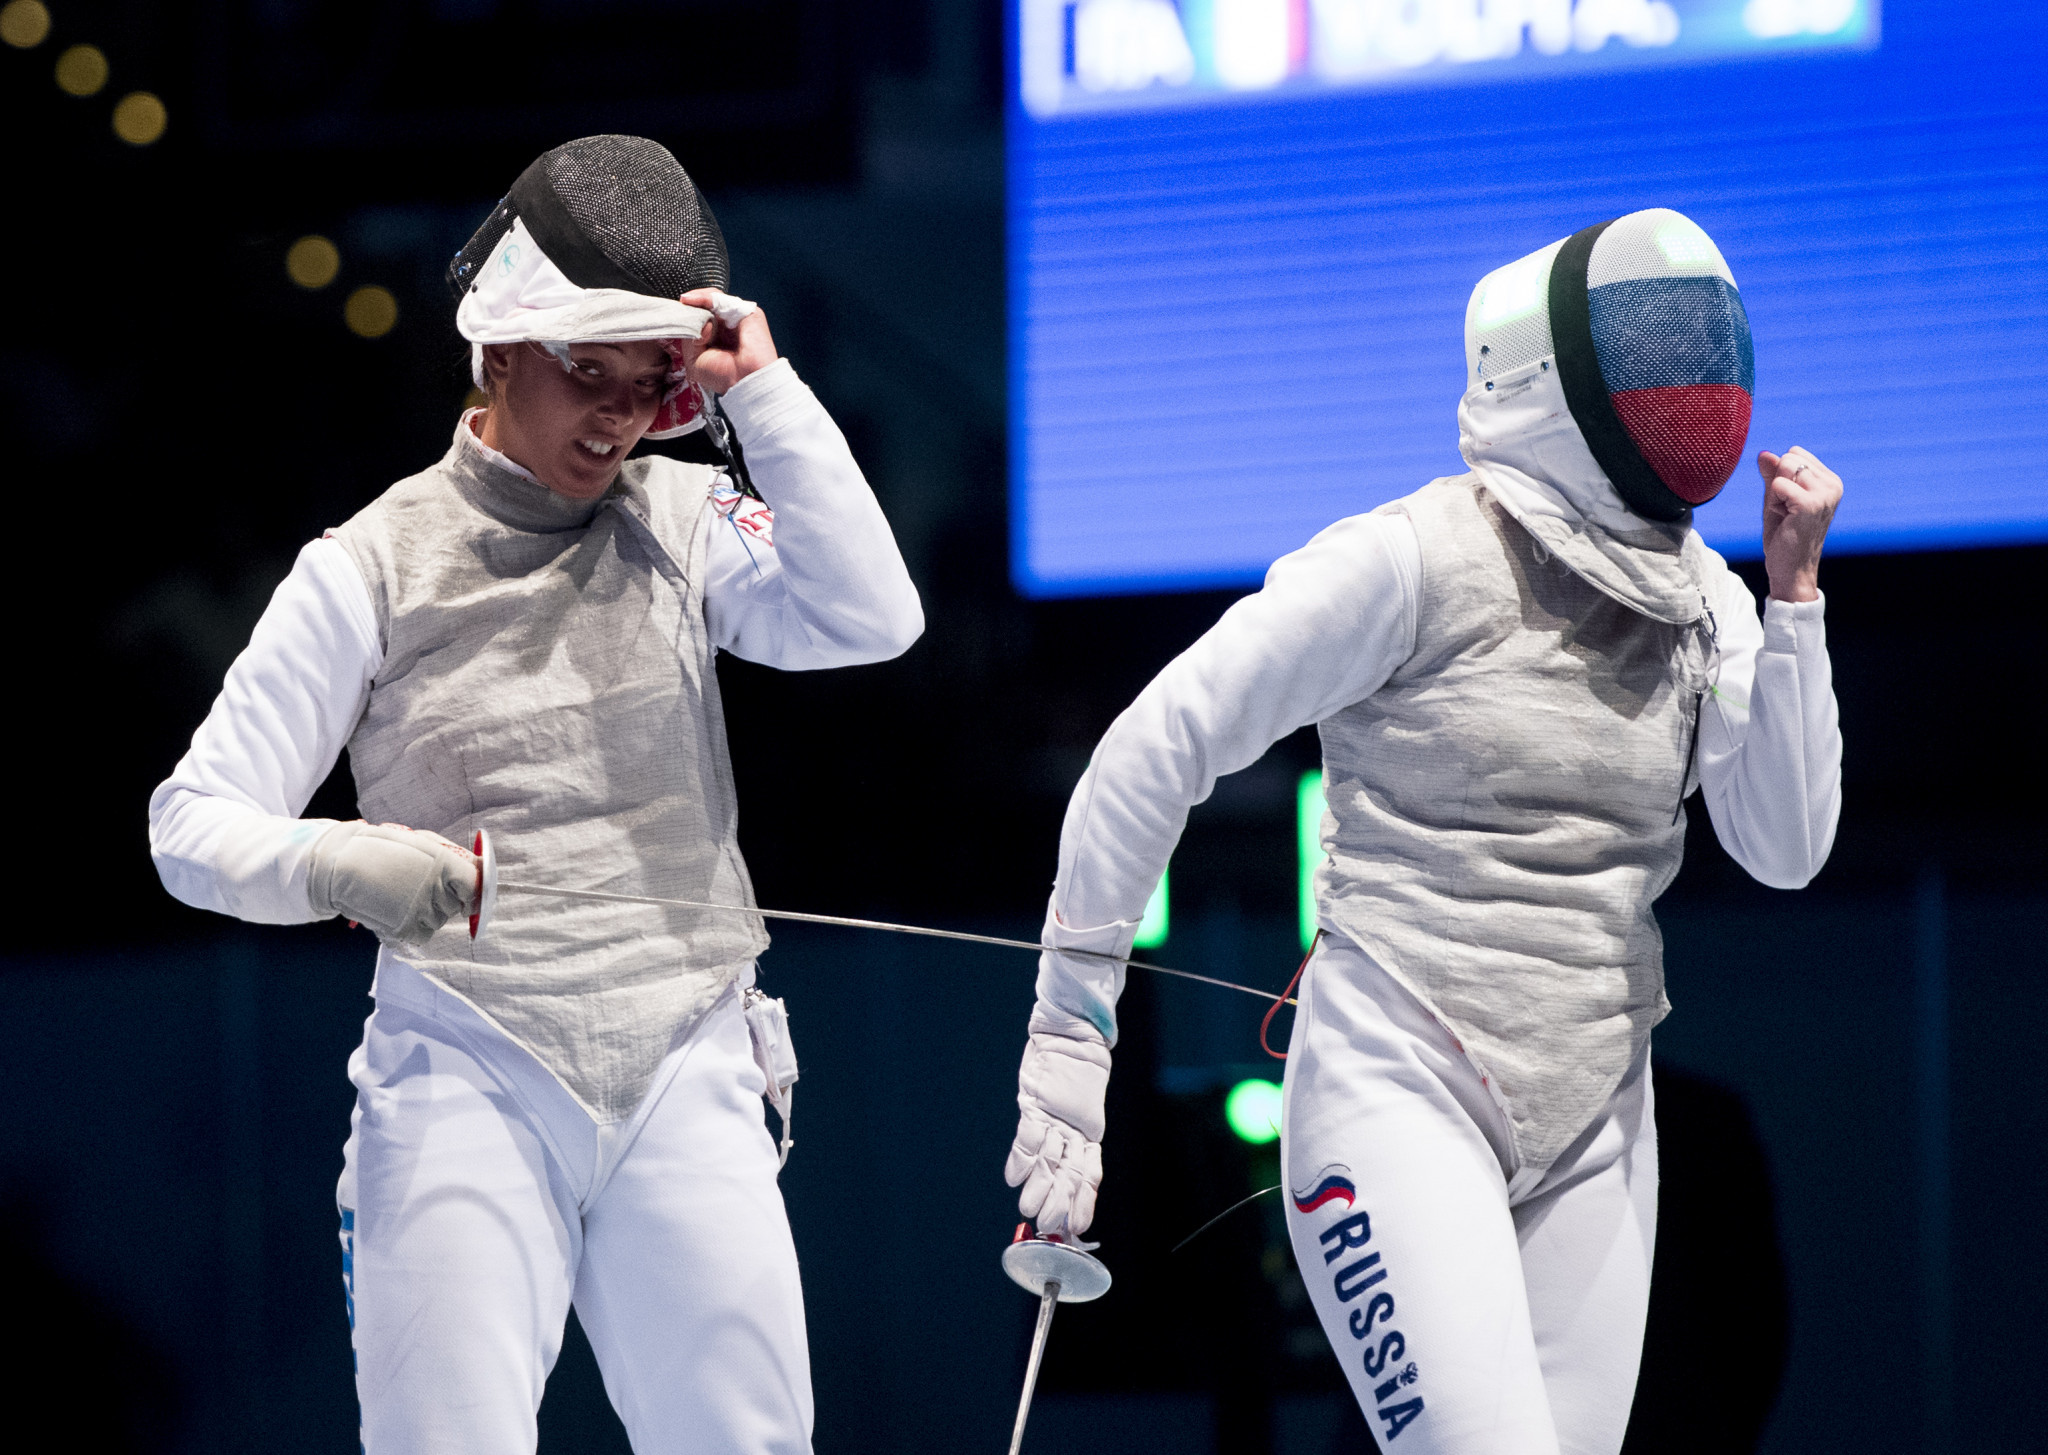  Inna Deriglazova won the Women's Foil World Cup in Katowice today ©Getty Images